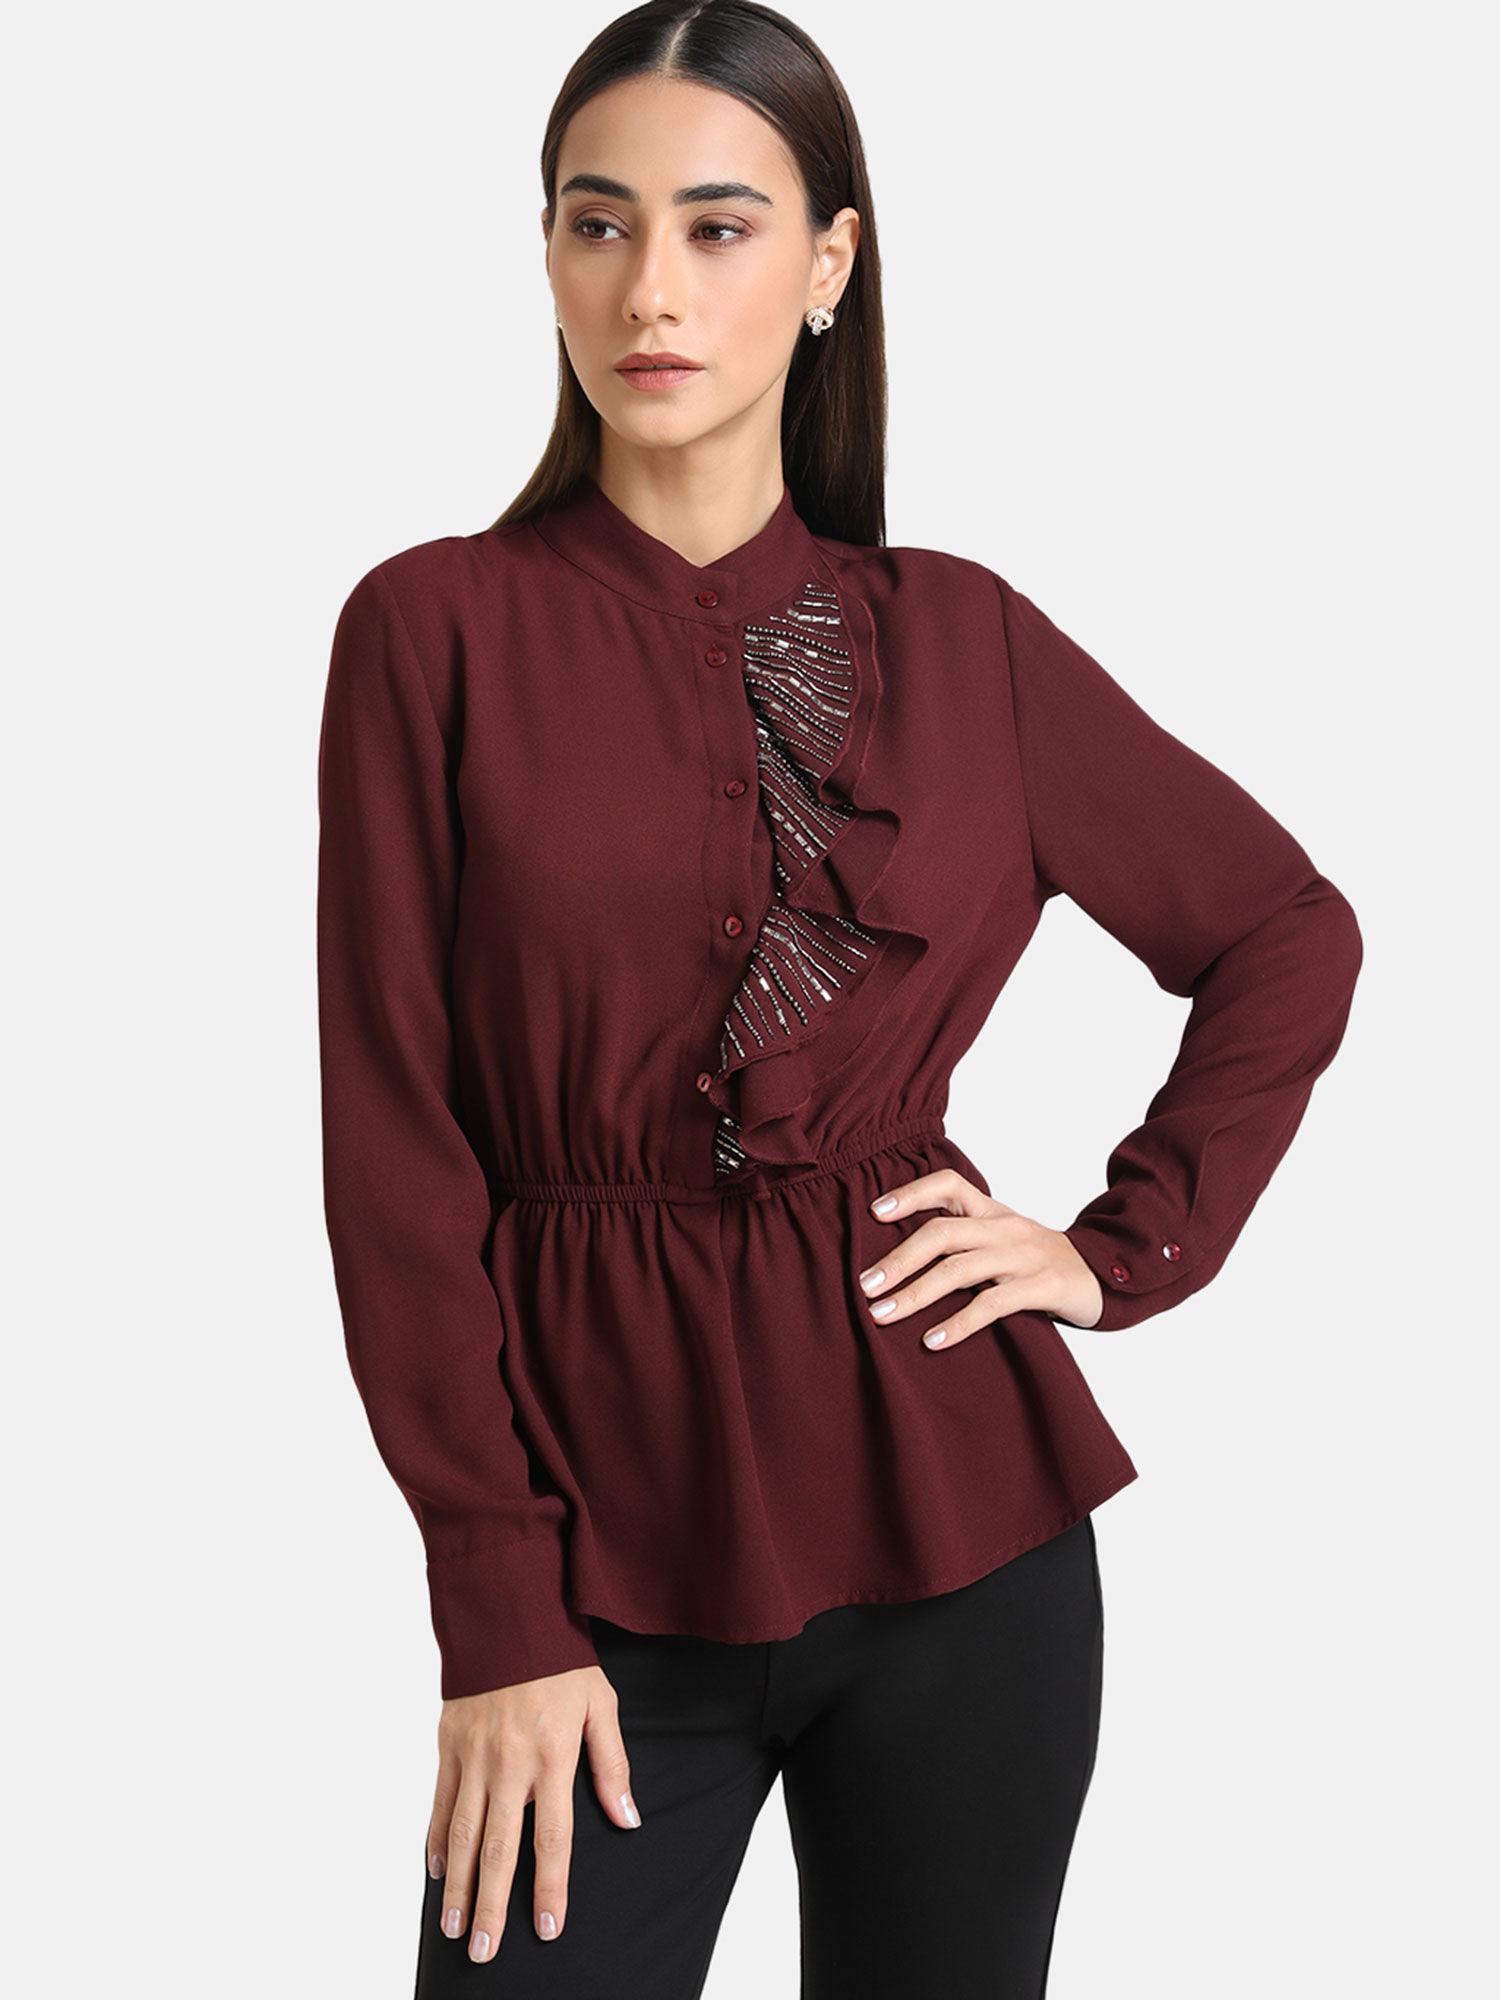 maroon-top-with-embellished-ruffle